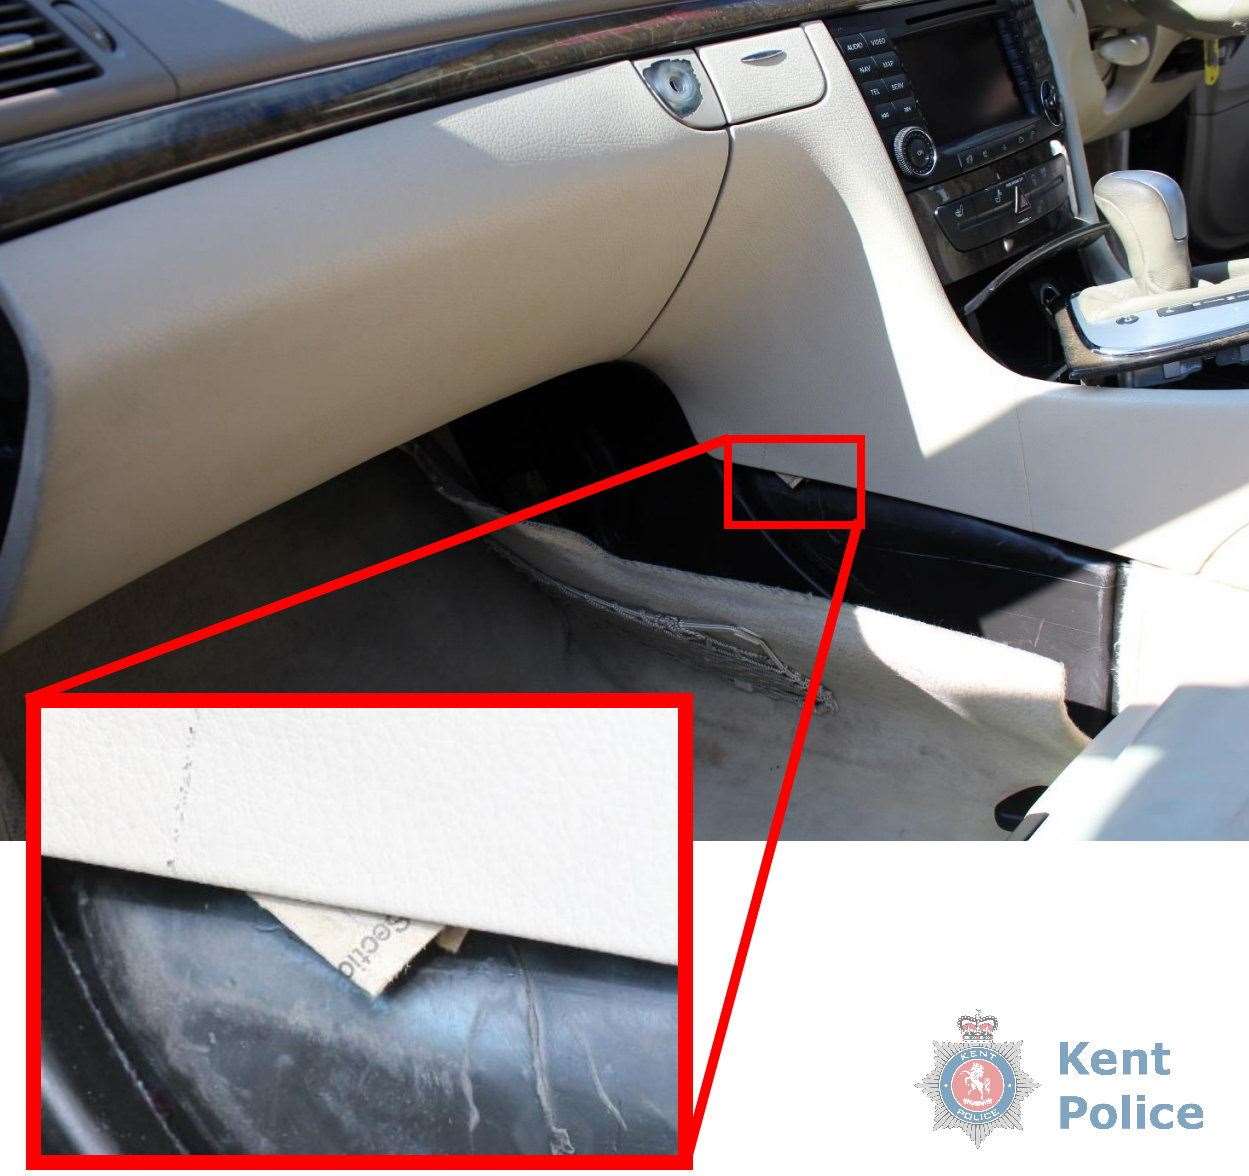 He was found with almost £9,000 in cash which he could not account for. Picture: Kent Police